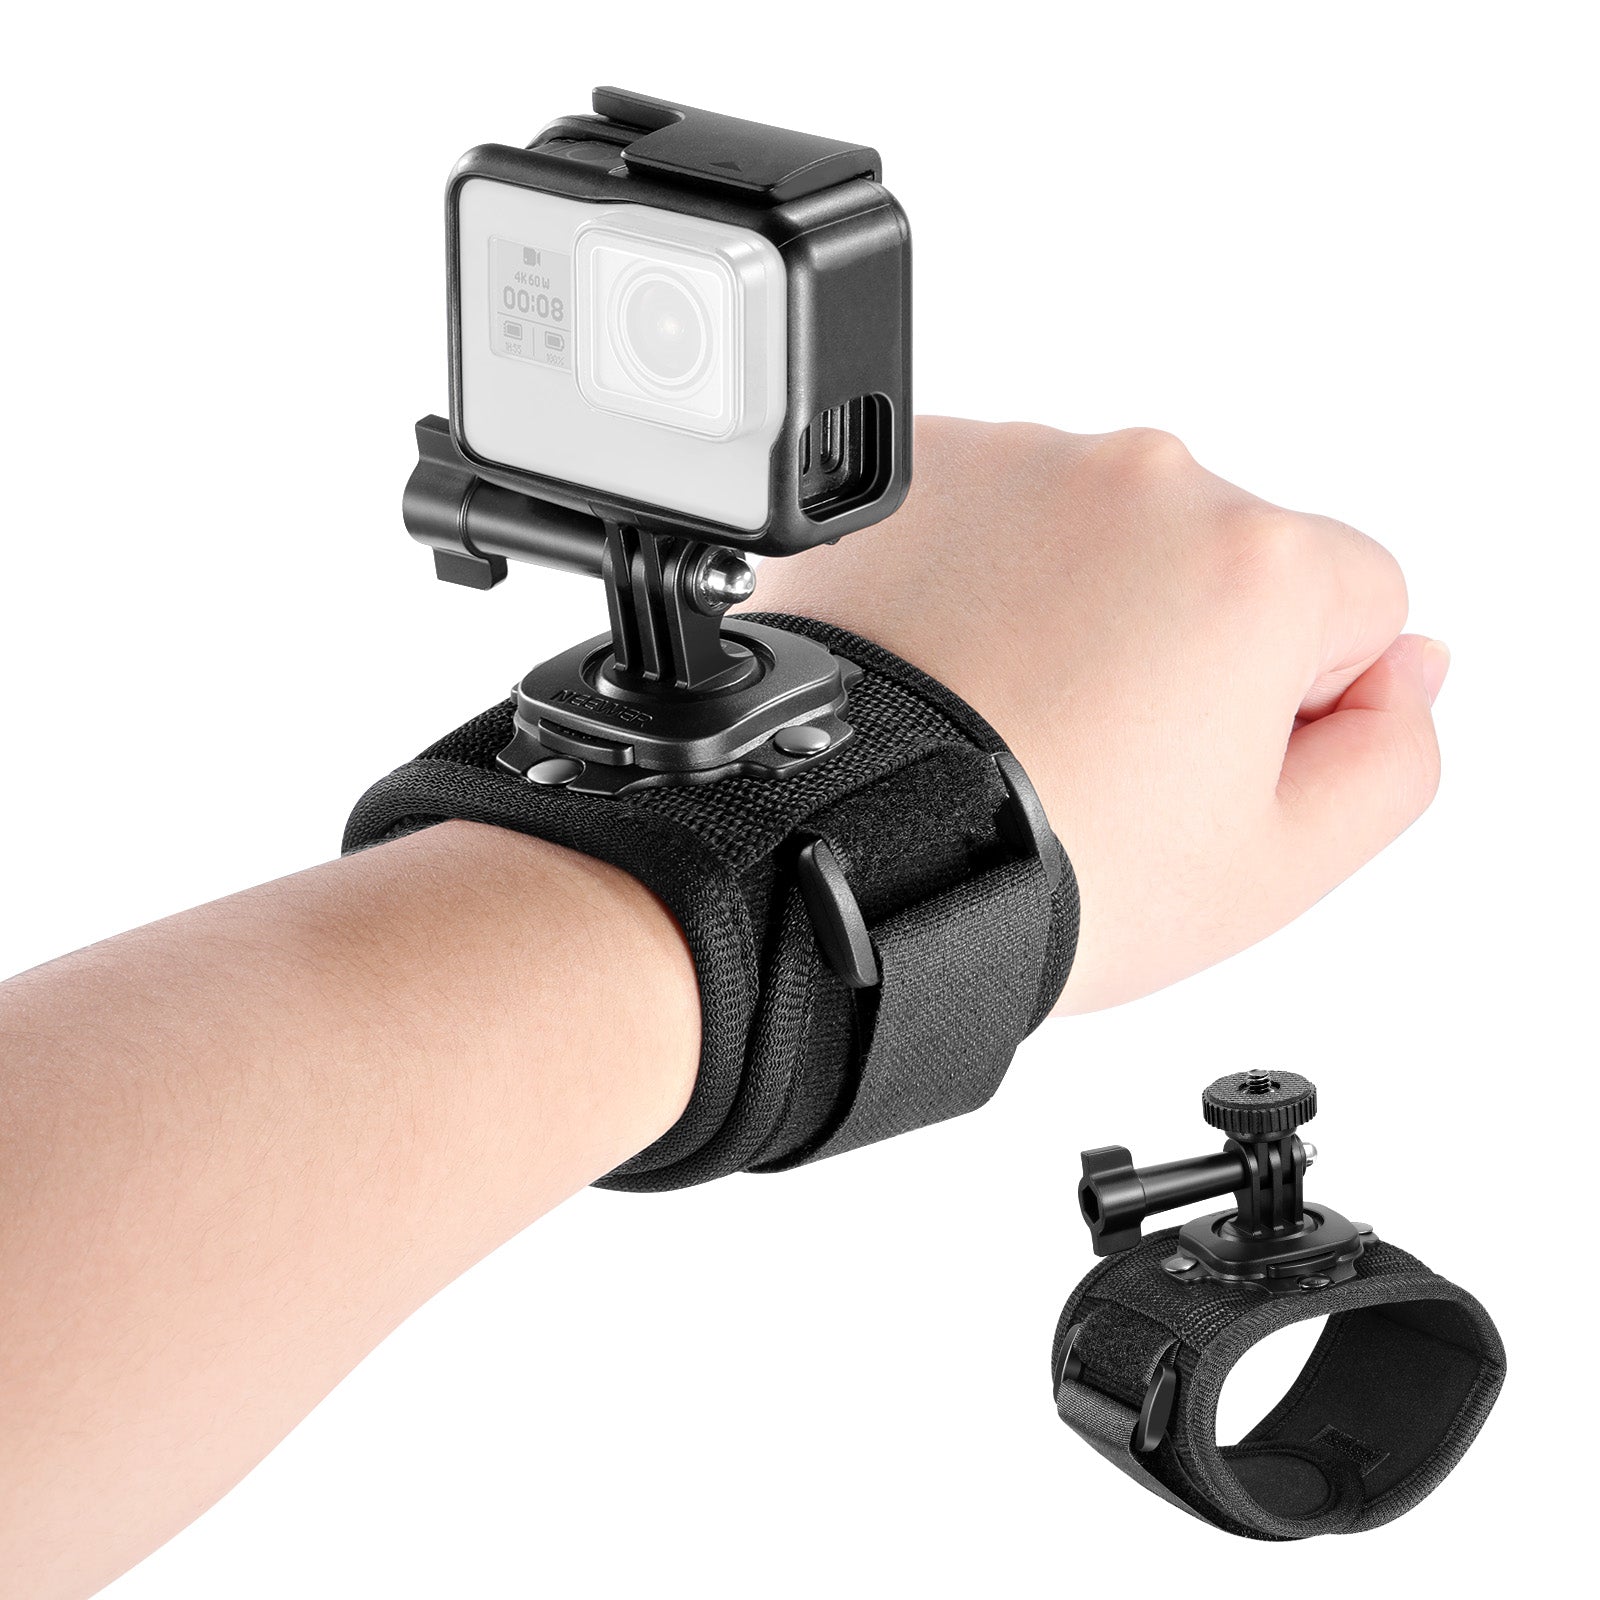 NEEWER Wrist Strap Mount with Thumbscrew Compatible with GoPro Hero